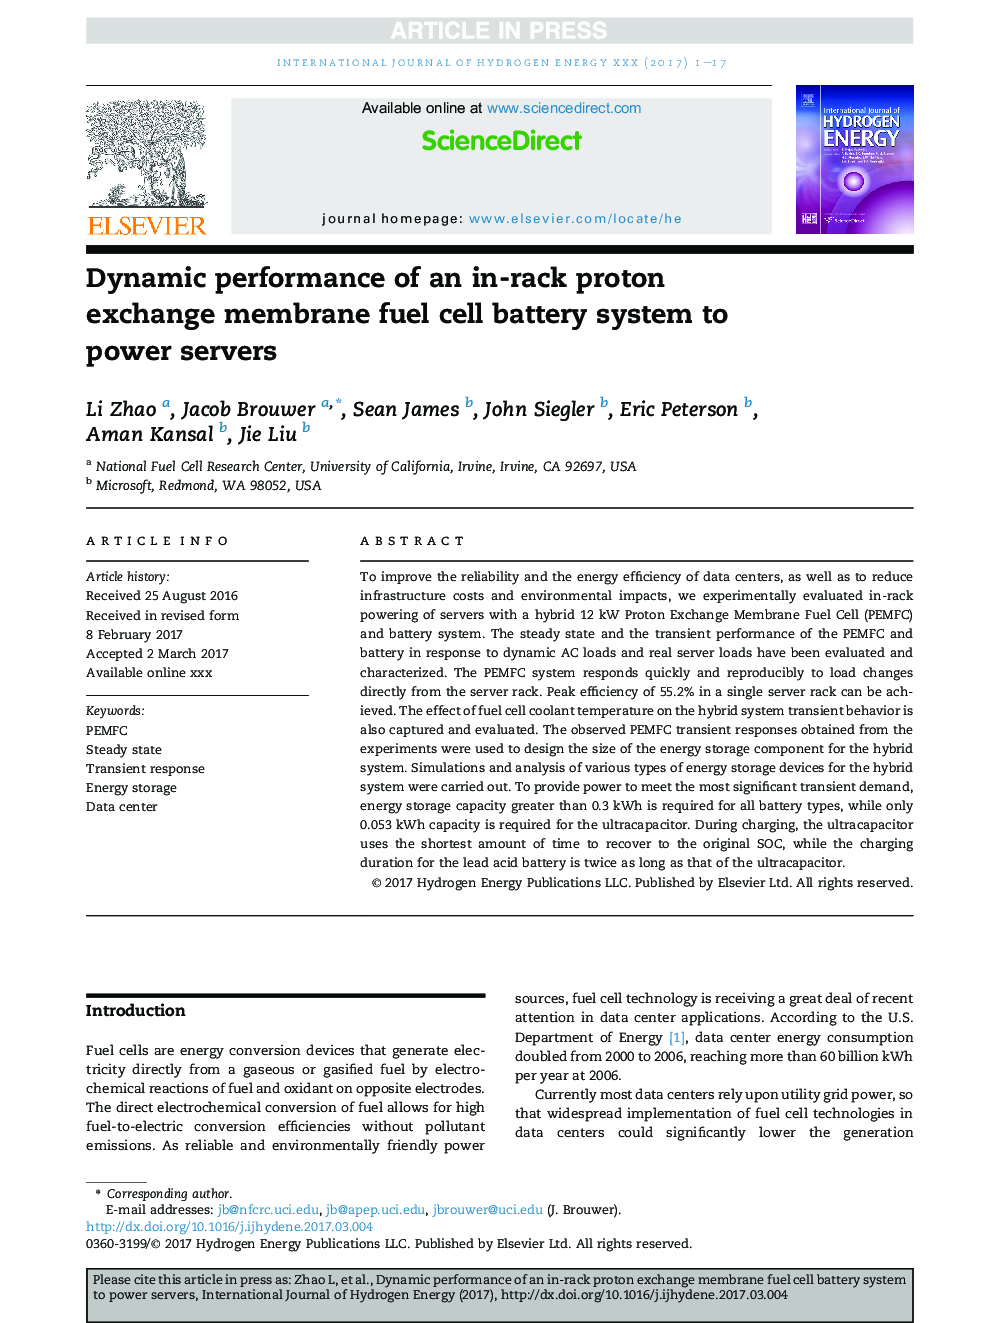 Dynamic performance of an in-rack proton exchange membrane fuel cell battery system to power servers